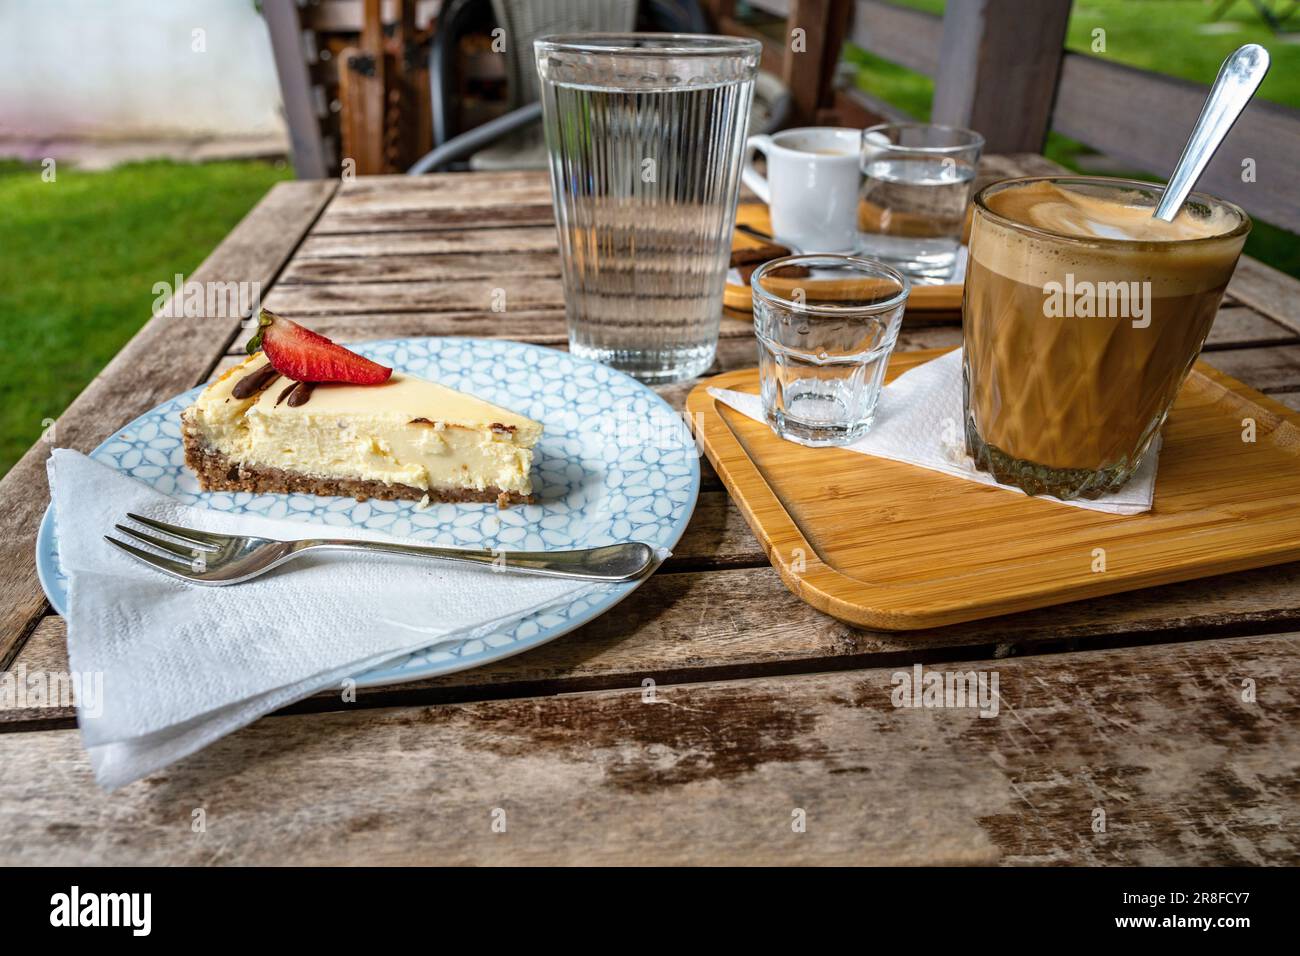 Cheesecake, two coffee and water on wooden table in garden. Stock Photo